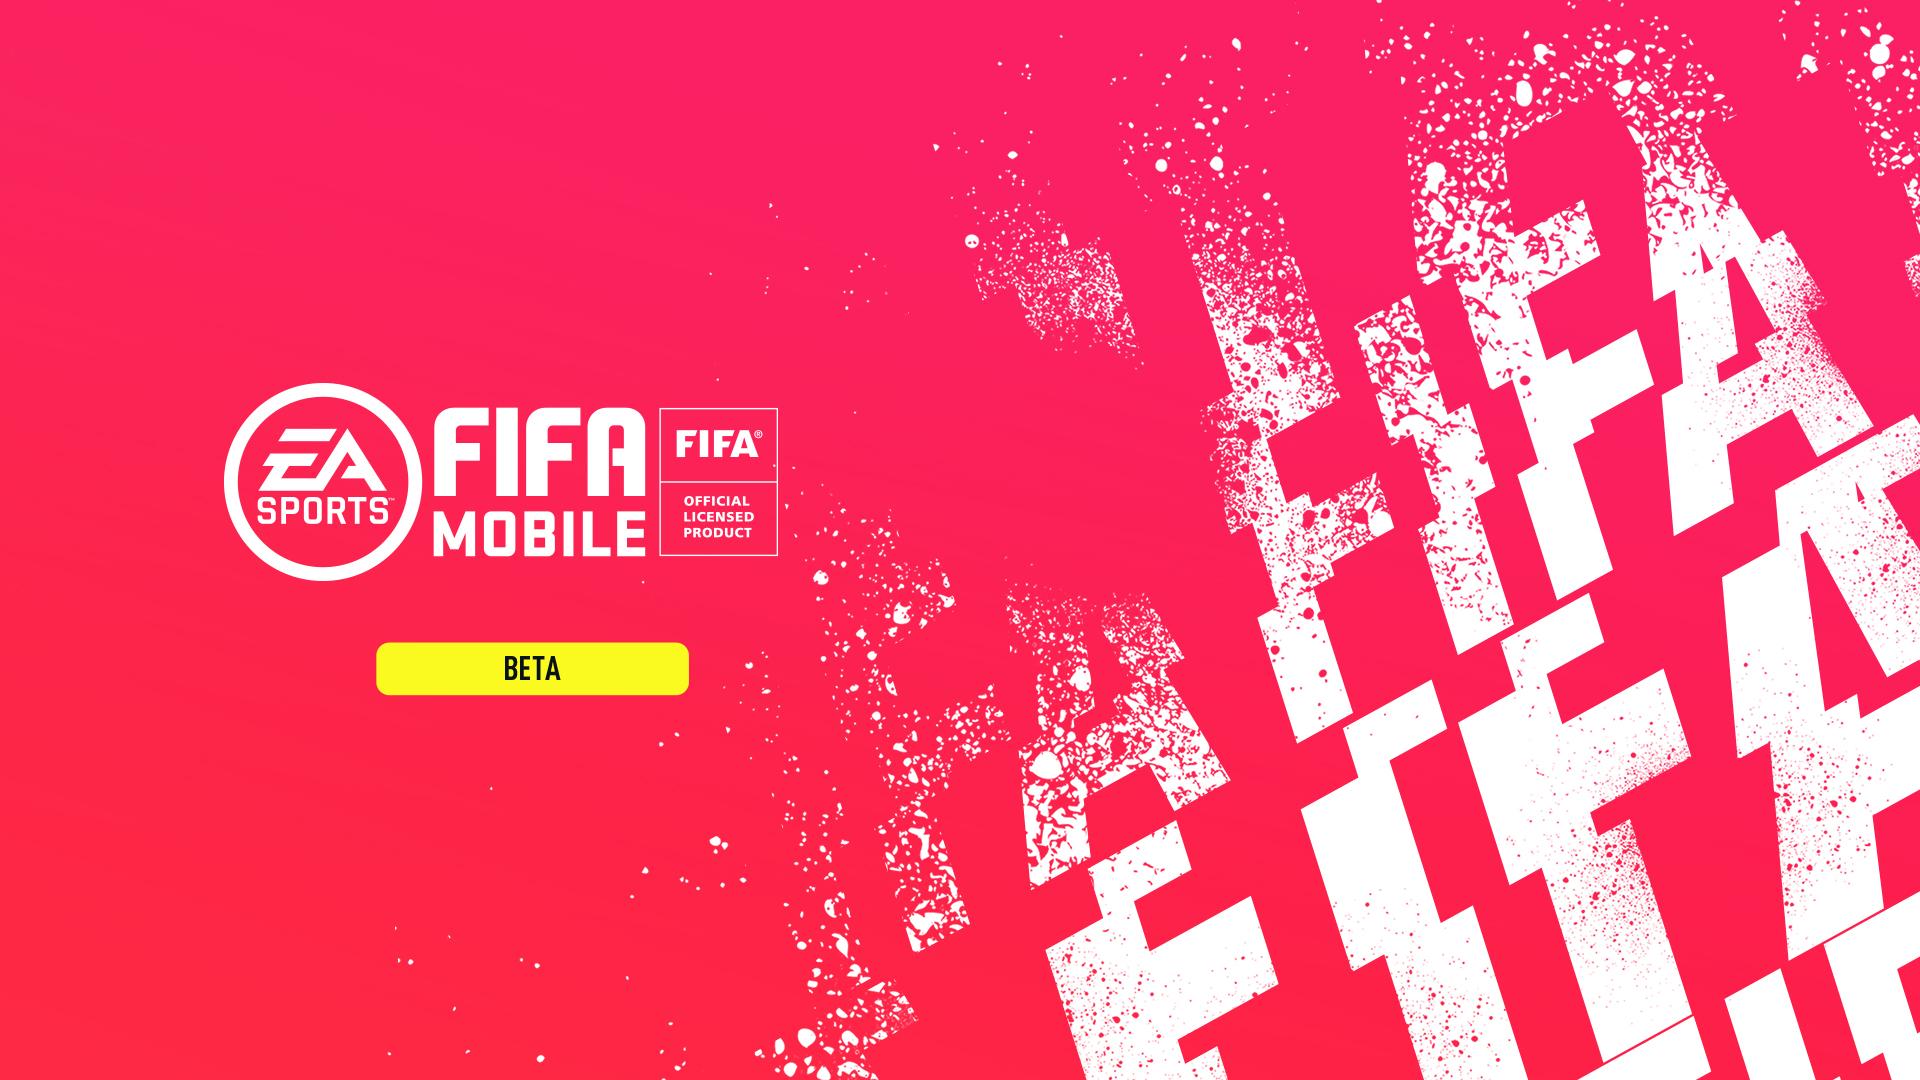 FIFA MOBILE 23 BETA: FIRST INTERFACE, GAMEPLAY & FEATURES 